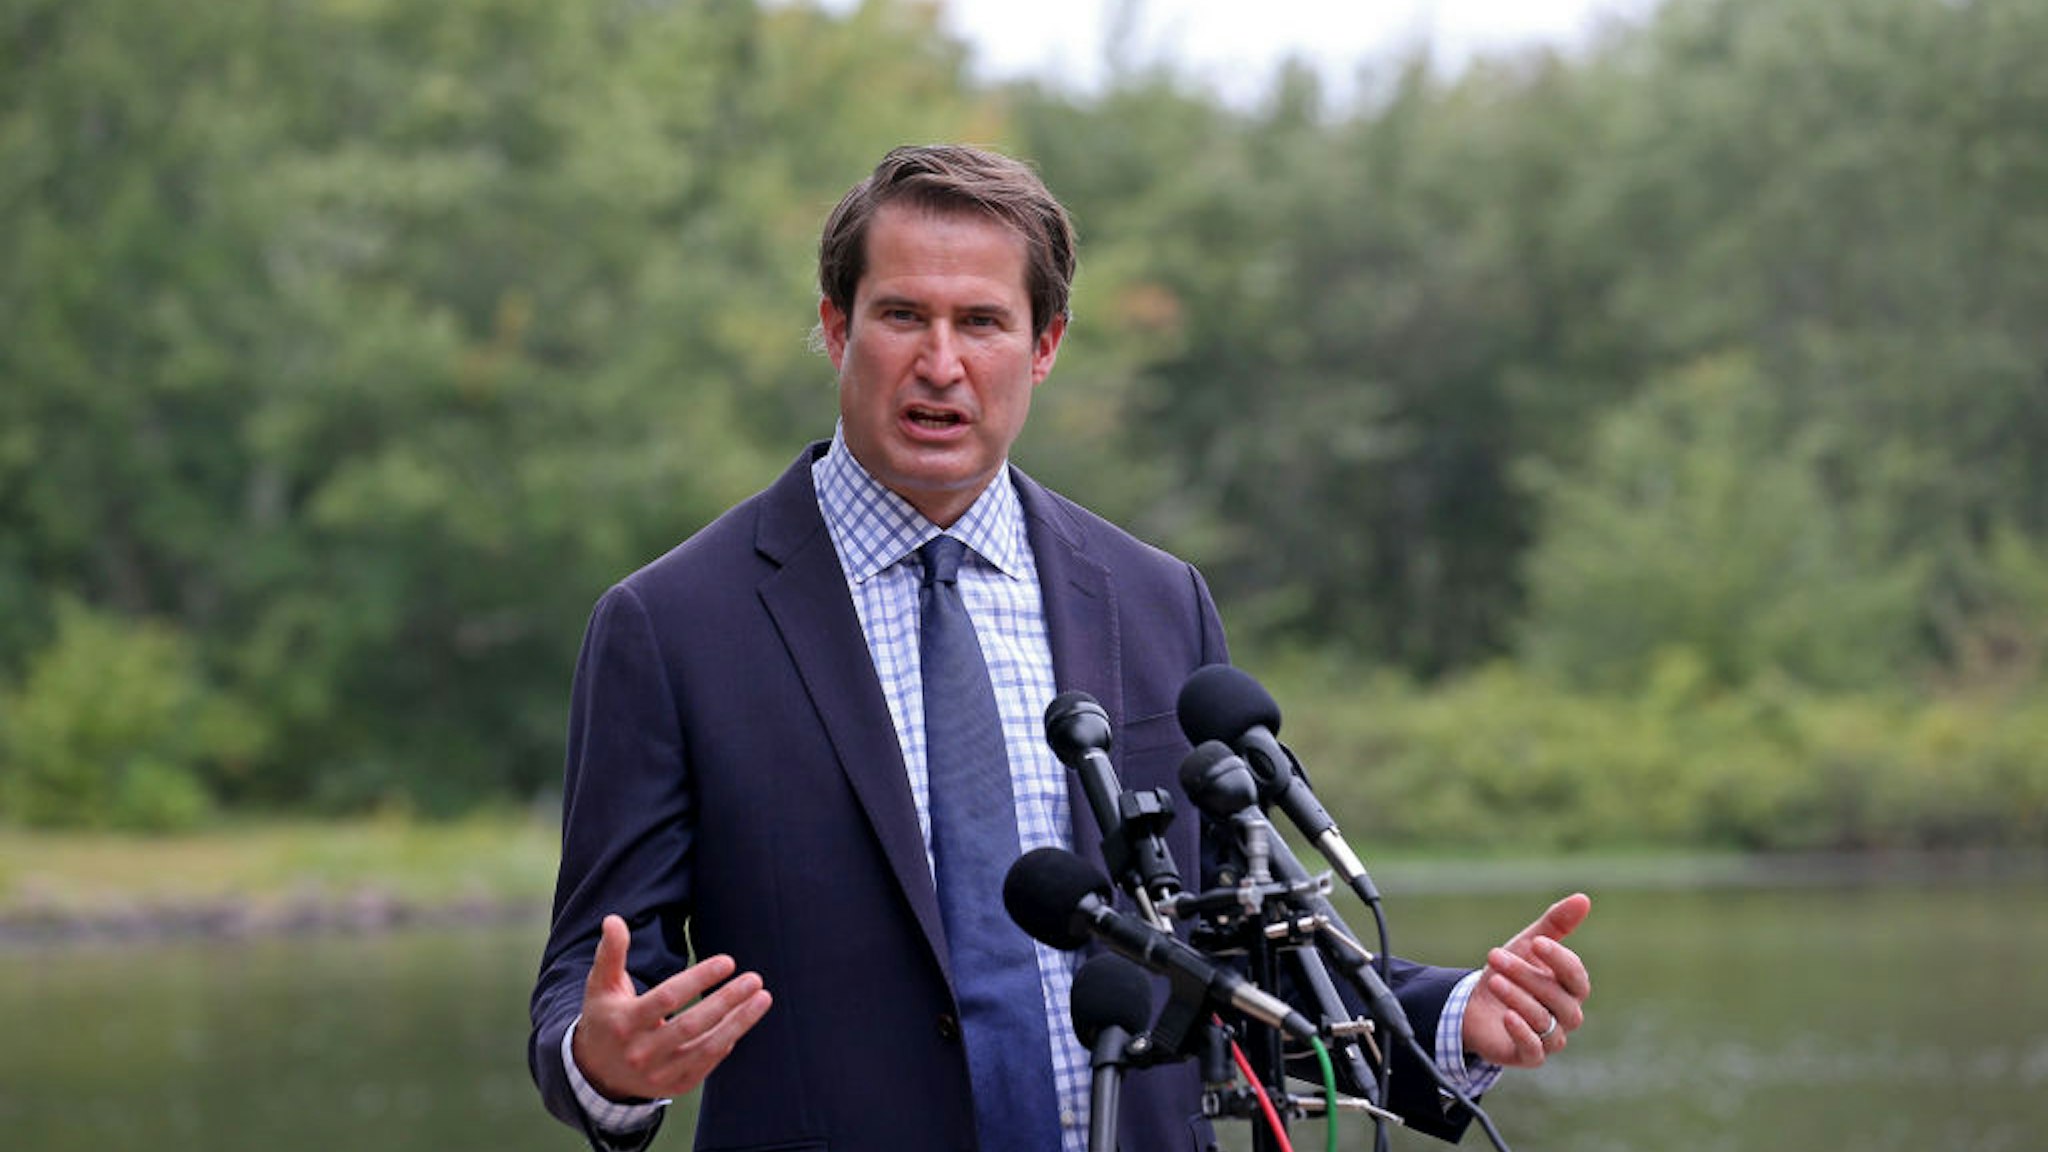 BEDFORD, MA. - SEPTEMBER 10: Congressman Seth Moulton speaks during a press conference in response to reports of President Trump"u2019s disparaging comments about U.S. service members who have died in combat on September 10, 2020 in Bedford, Massachusetts. (Staff Photo By Matt Stone/ MediaNews Group/Boston Herald)